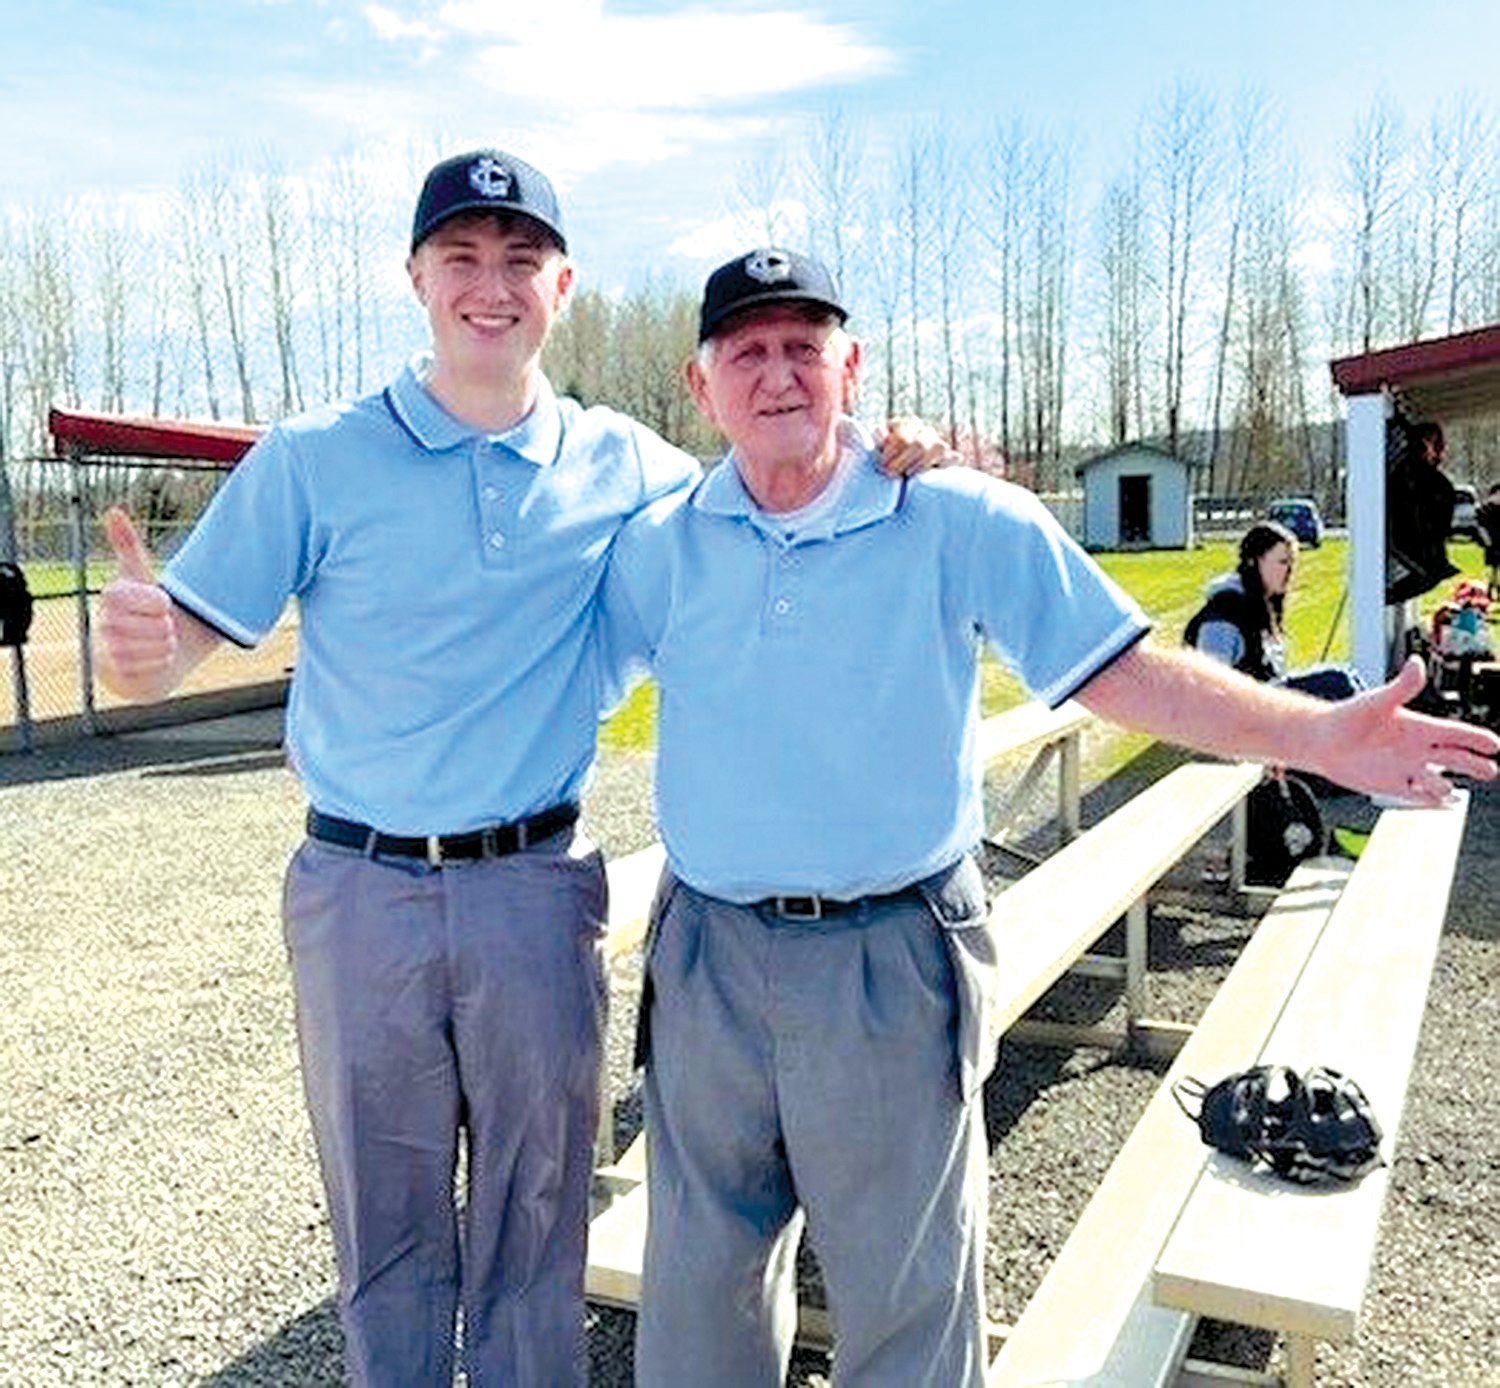 Logan Setera, left, and his great-grandfather Gordon Dunn pose together after umpiring a game together.